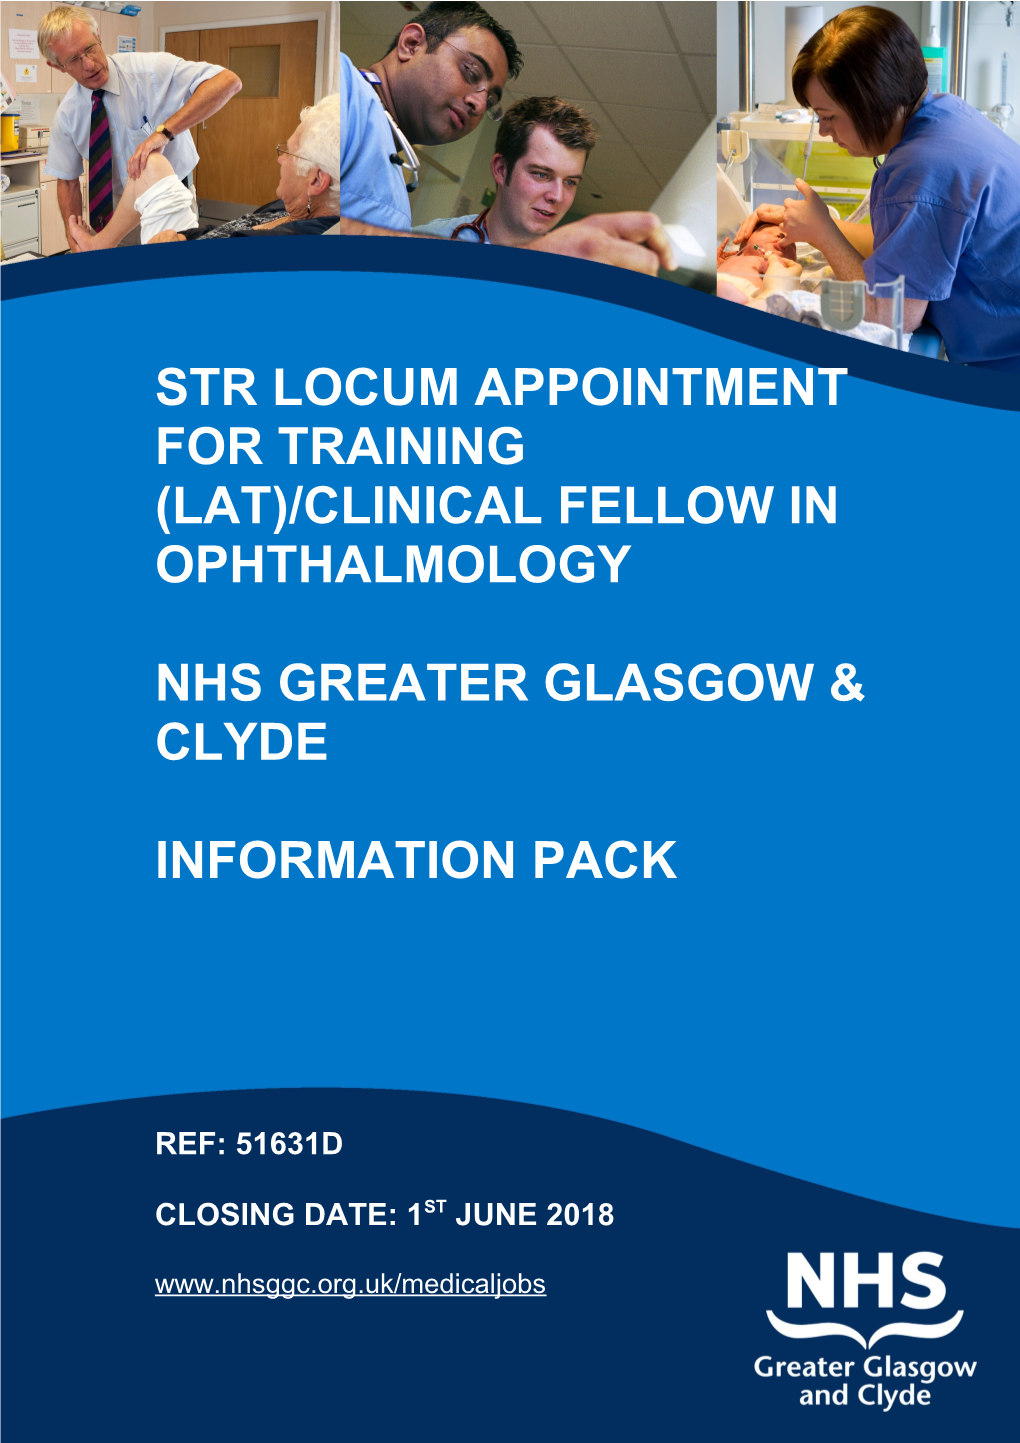 Str Locum Appointment for Training (LAT)/CLINICAL FELLOW in OPHTHALMOLOGY